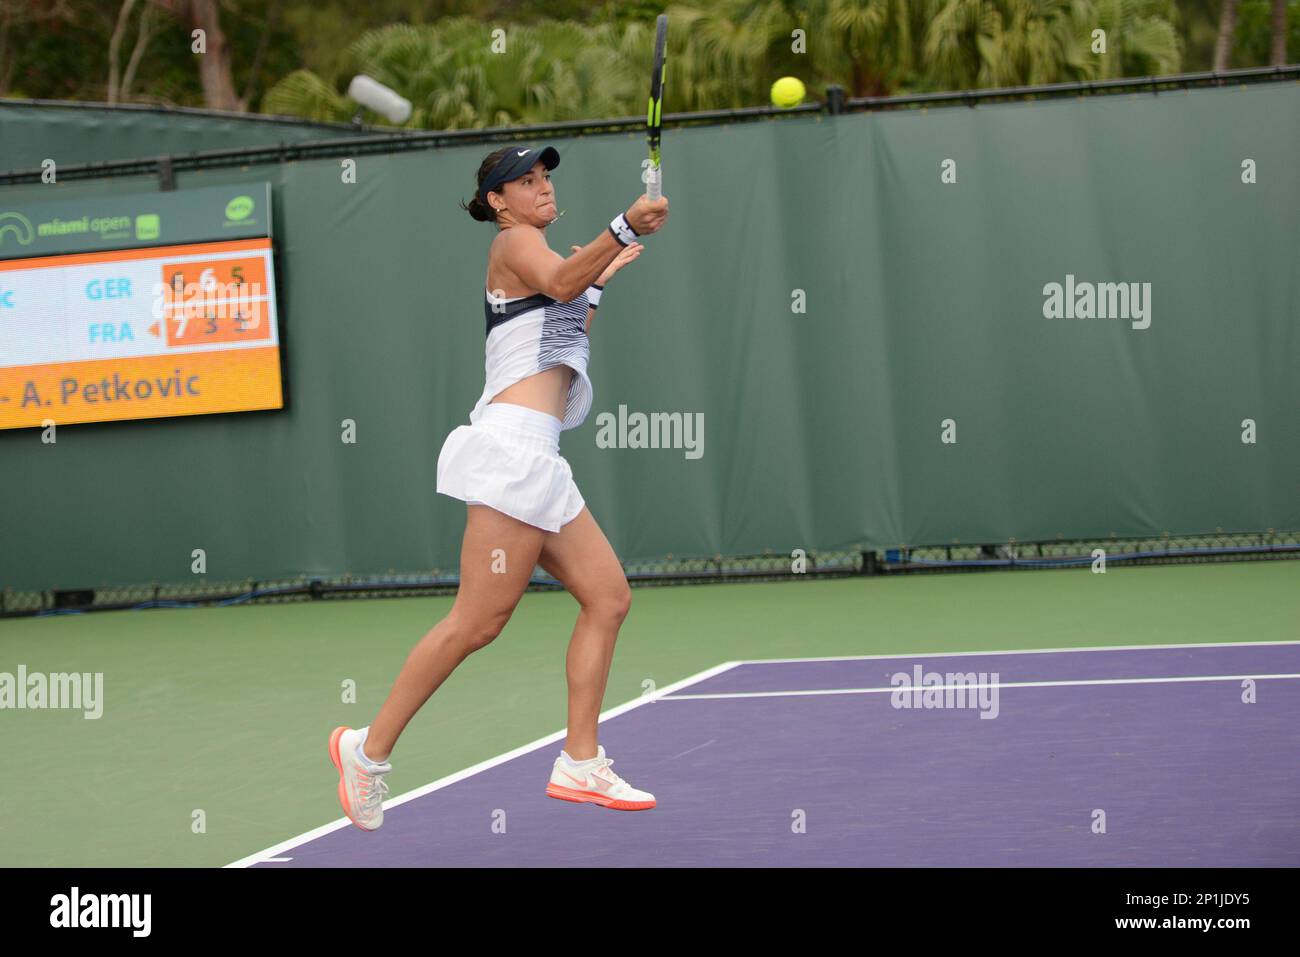 March 24, 2016 - Miami, Florida, United States - CAROLINE GARCIA of France  in action during her match vs A. Petkovic at the Miami Open. (Cal Sport  Media via AP Images Stock Photo - Alamy